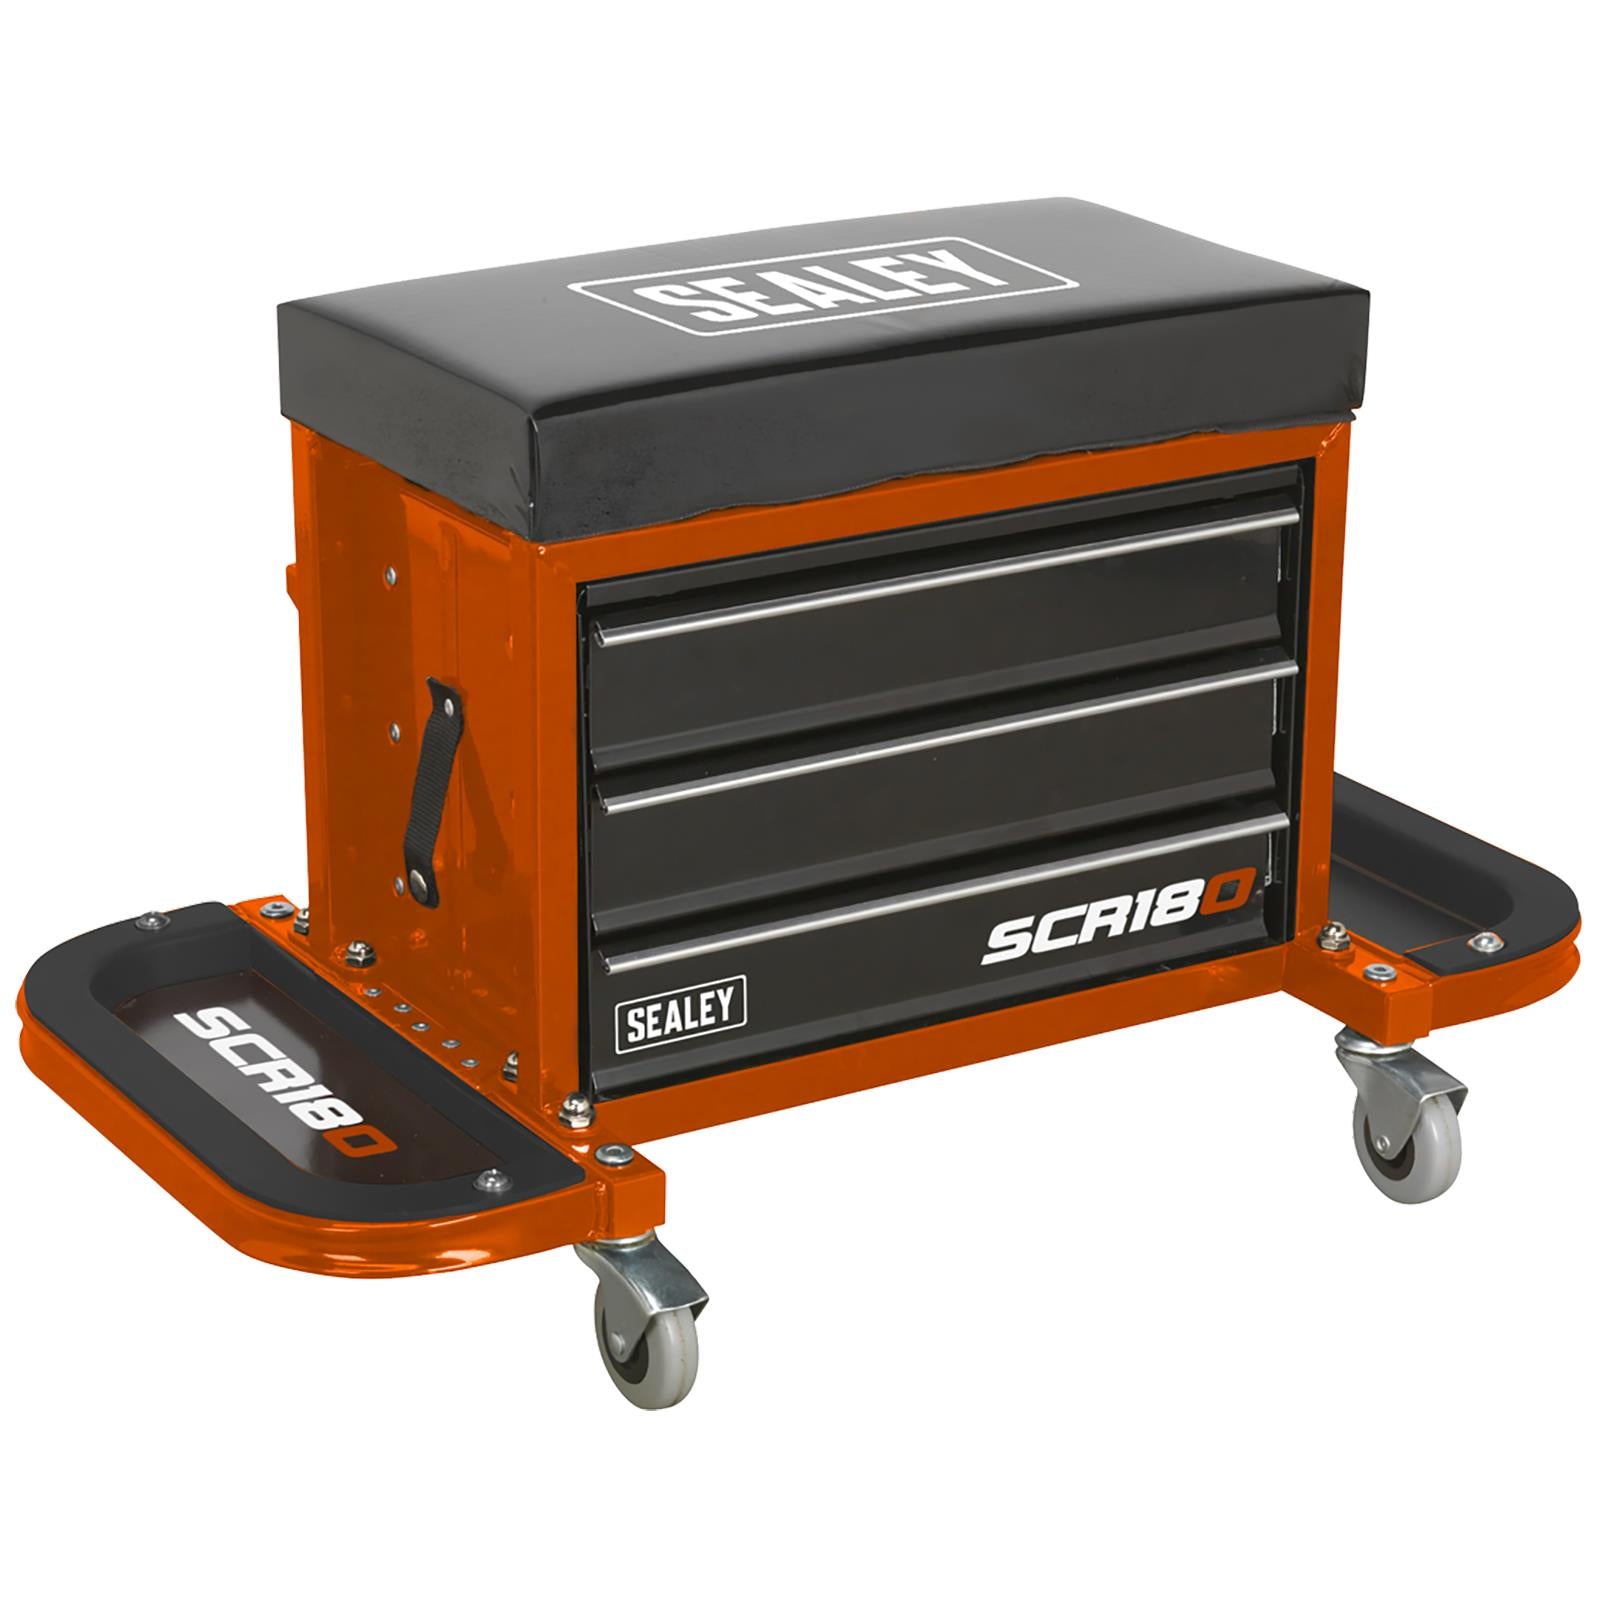 Sealey Mechanics Rolling Utility Seat and Toolbox with Drawers Orange